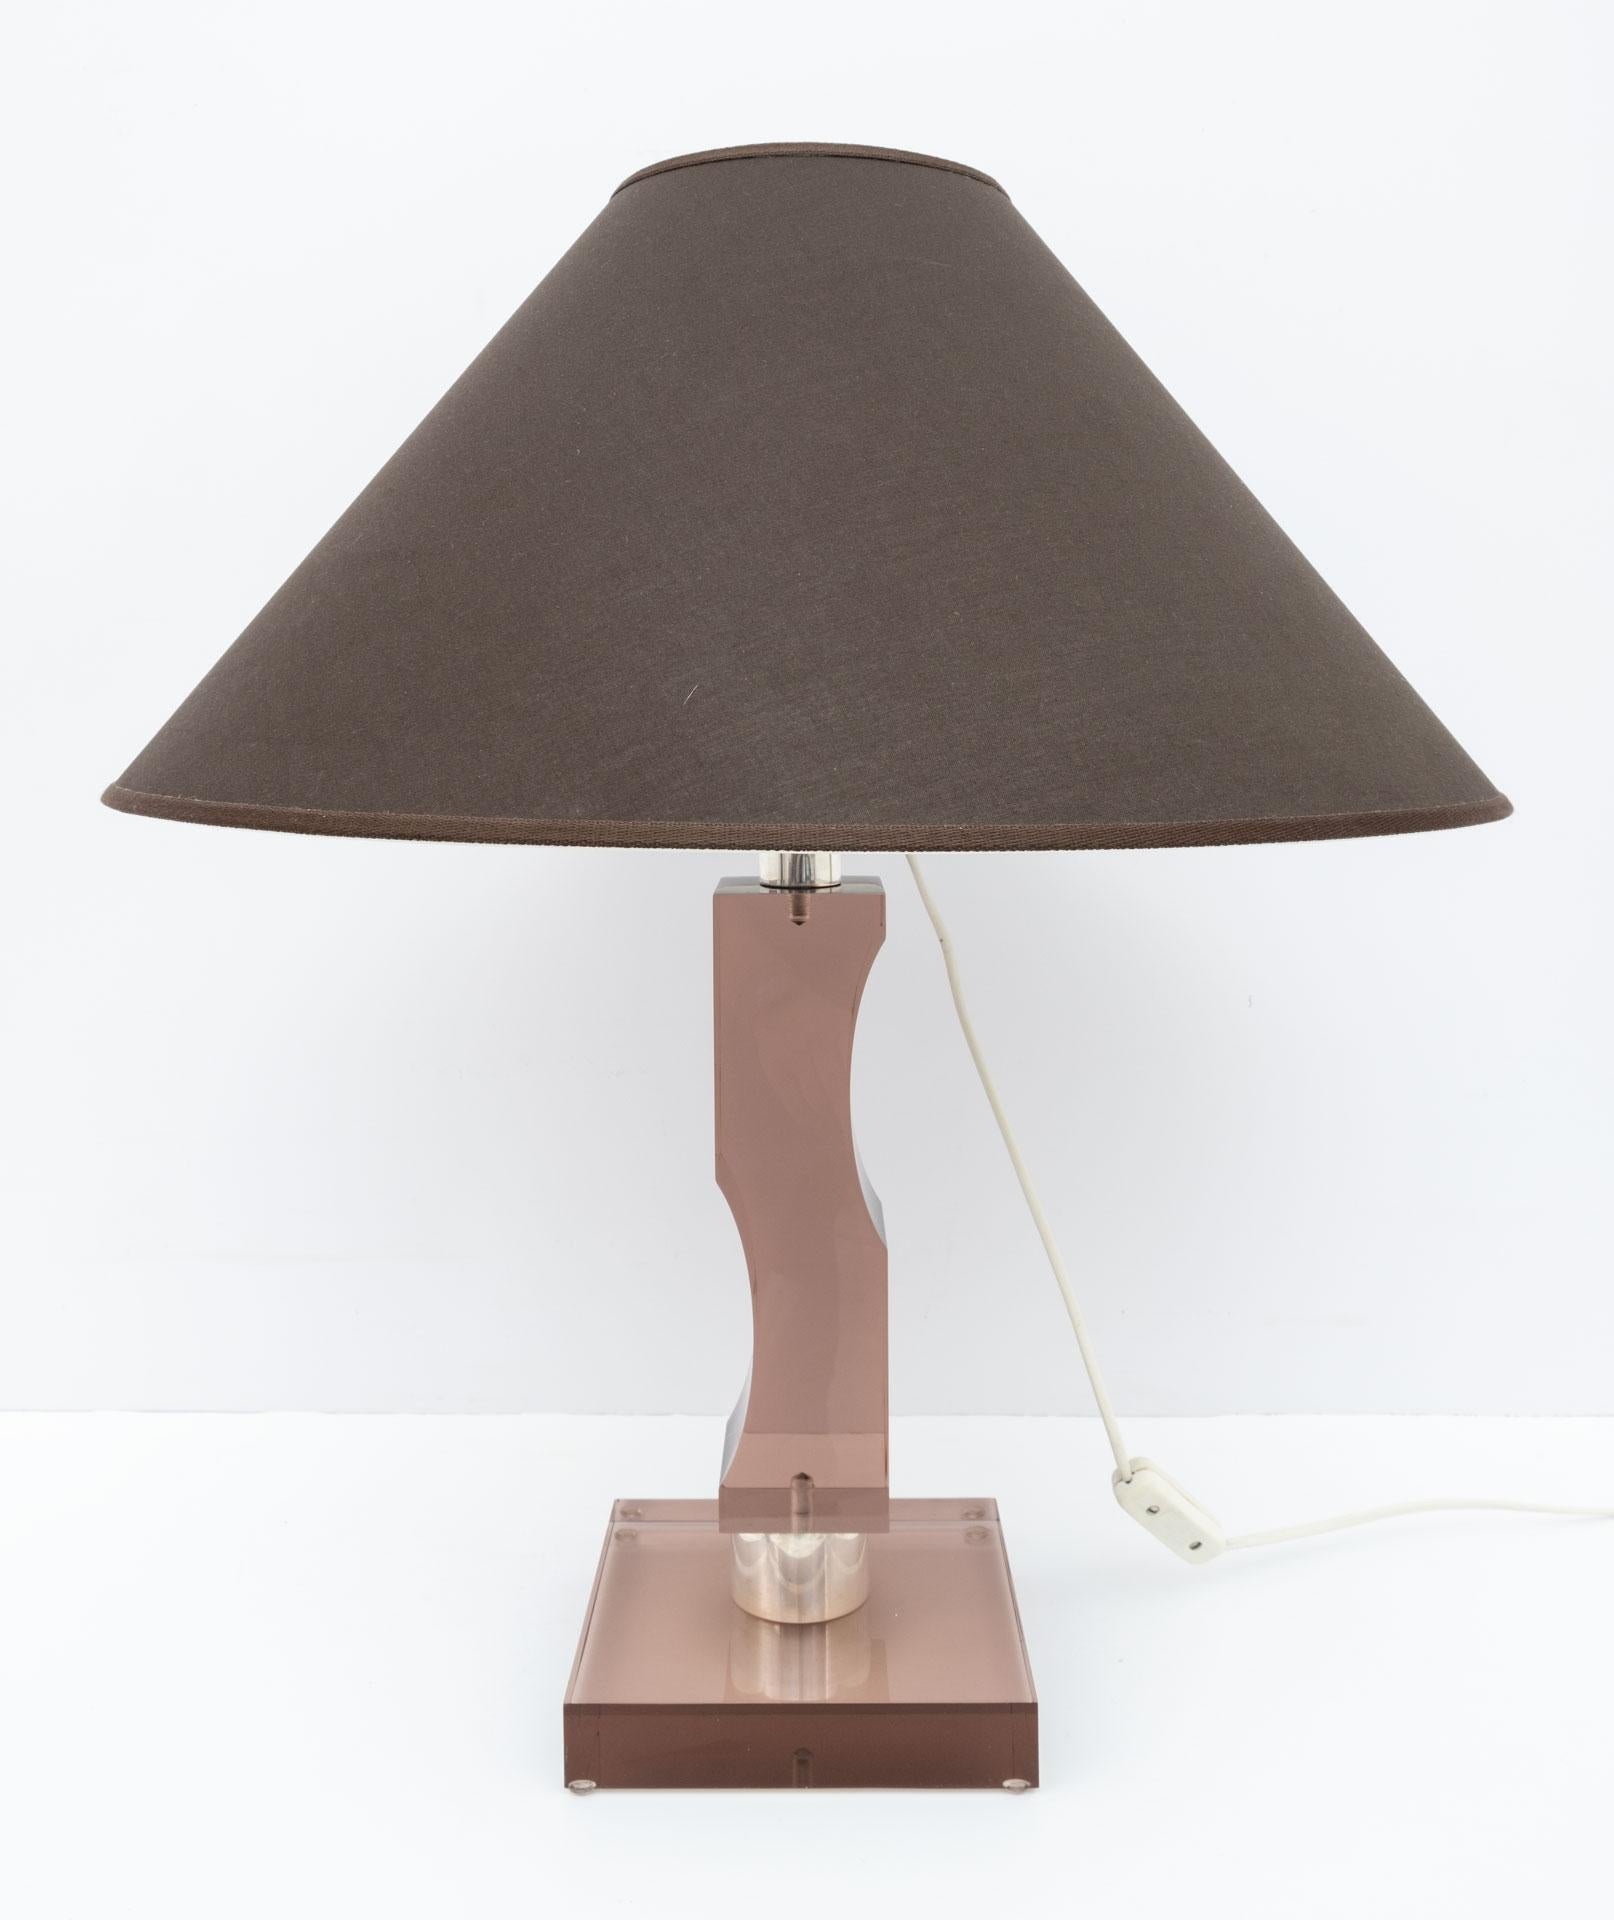 Late 20th Century Mid-century Moden Italian Plexiglass and Silver Table Lamp, 1970s For Sale